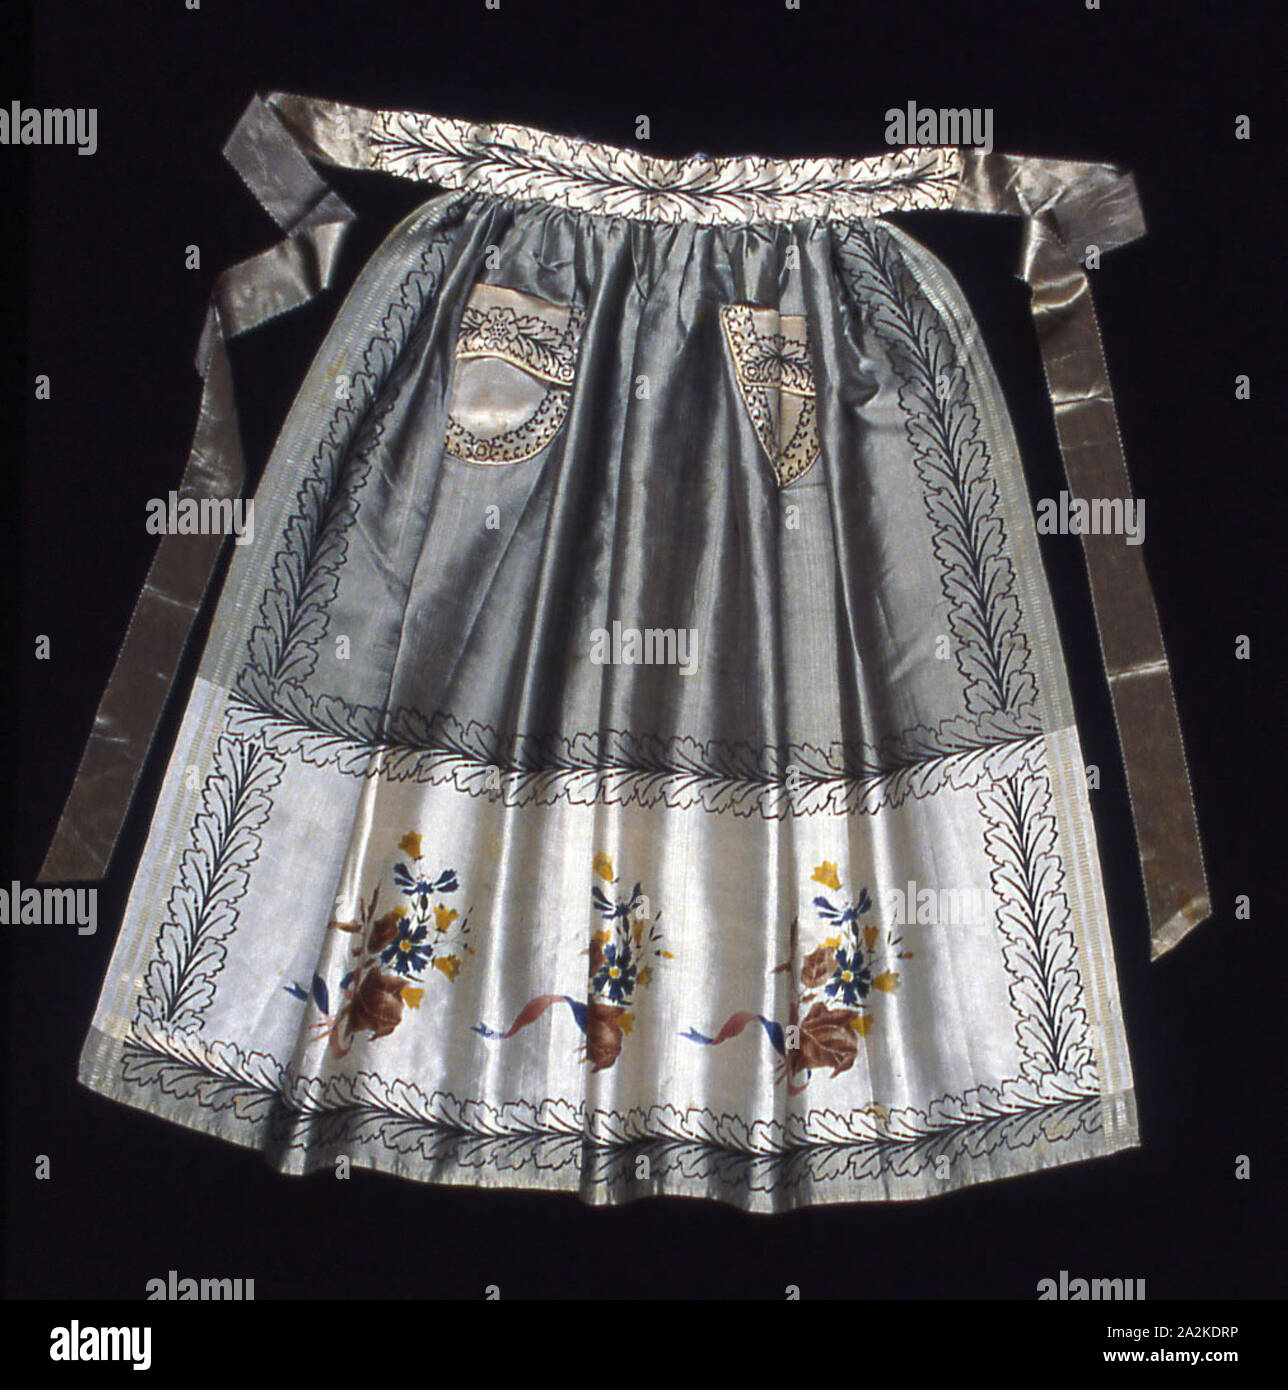 Apron, 1800/25, Switzerland, Silk, plain weave with supplementary patterning warps, block printed and stencilled or painted, two selvages present, ribbon ties: warp-float faced satin weave, 68.5 x 86.6 cm (27 x 34 1/8 in Stock Photo